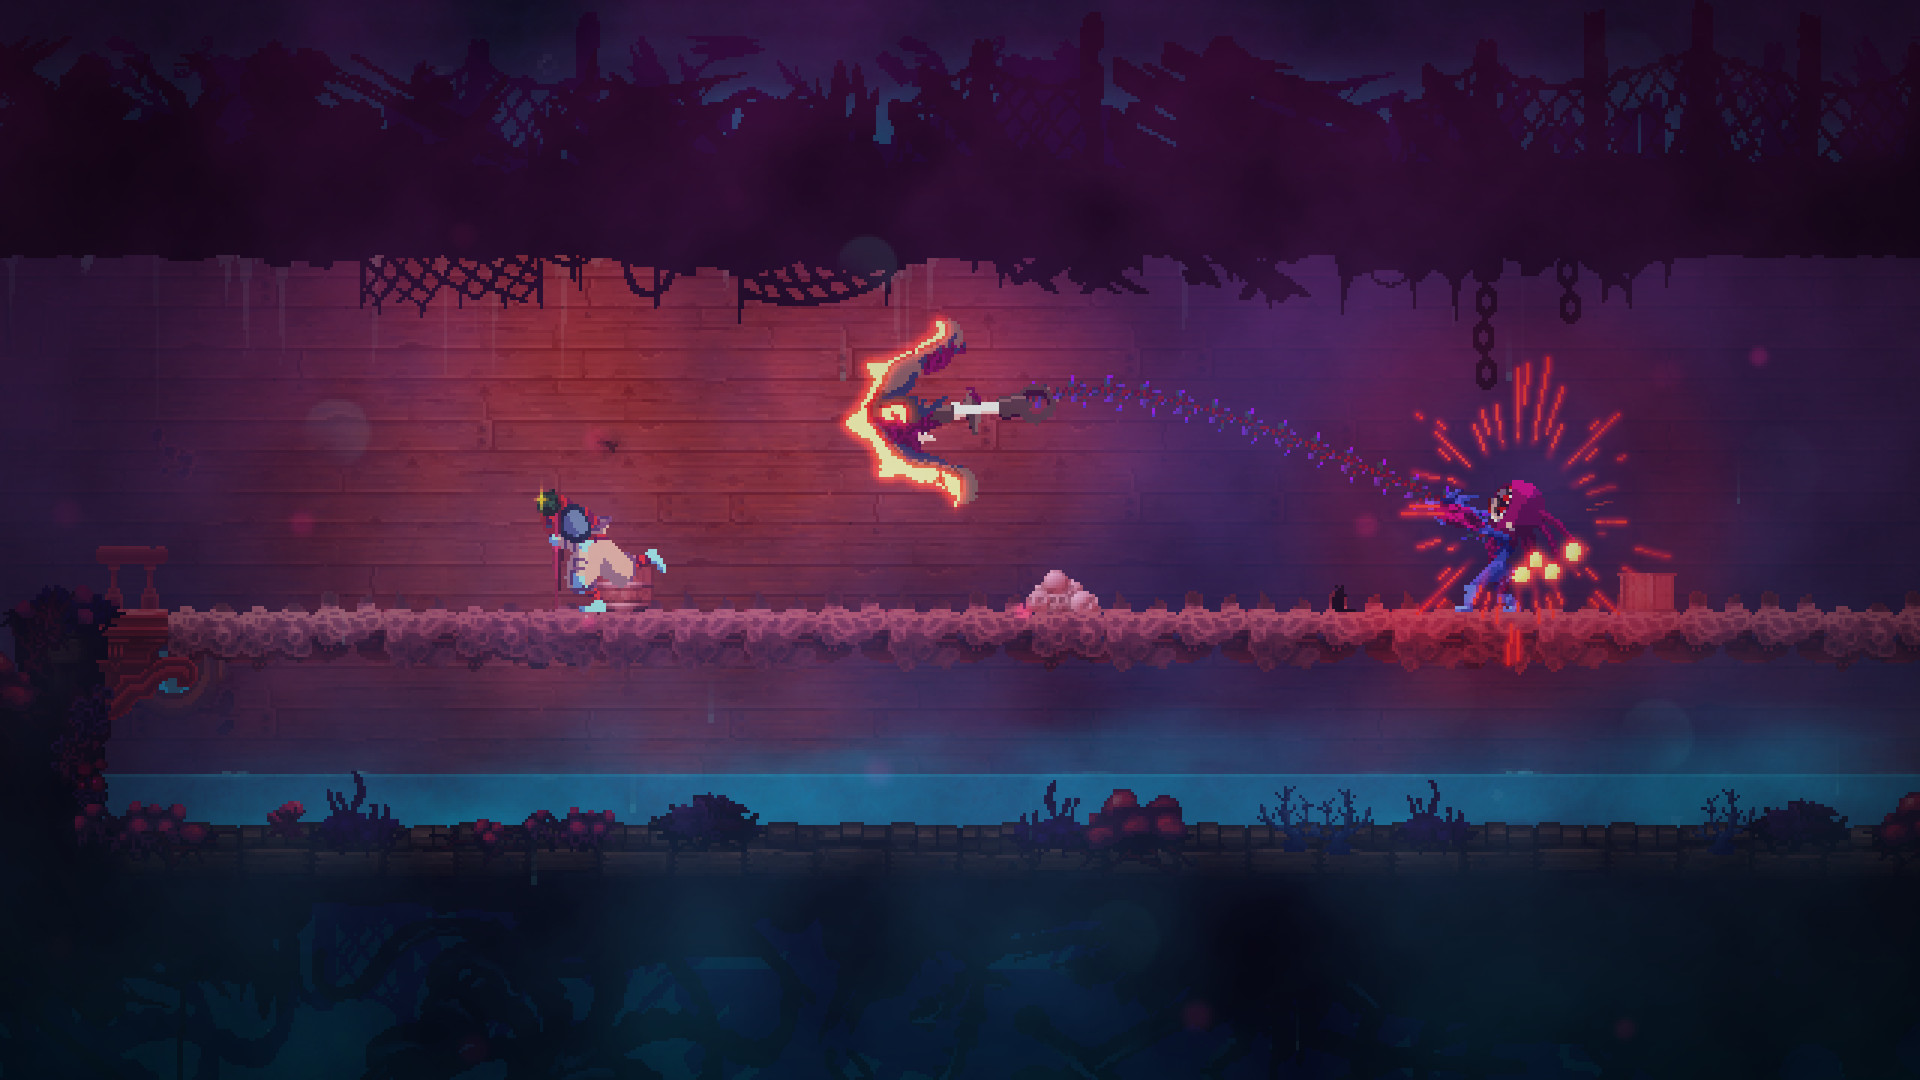 Dead Cells: The Queen and the Sea | SEA (d82b09ee-59dc-4867-be22-1d498f129193)